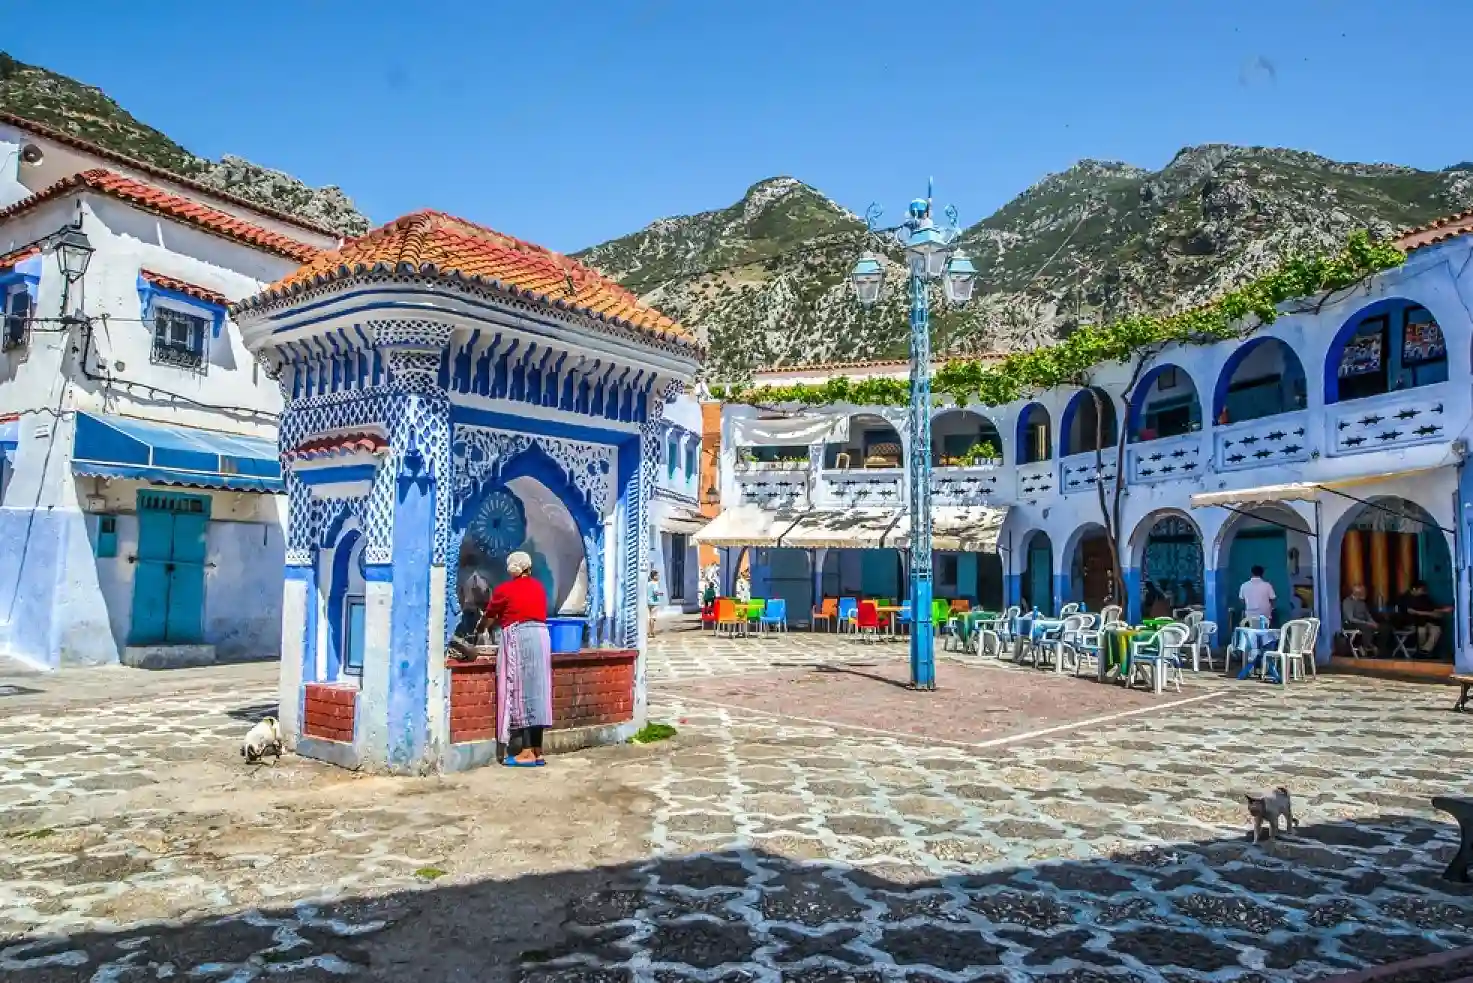 Day 2: Free Day to Explore Chefchaouen 